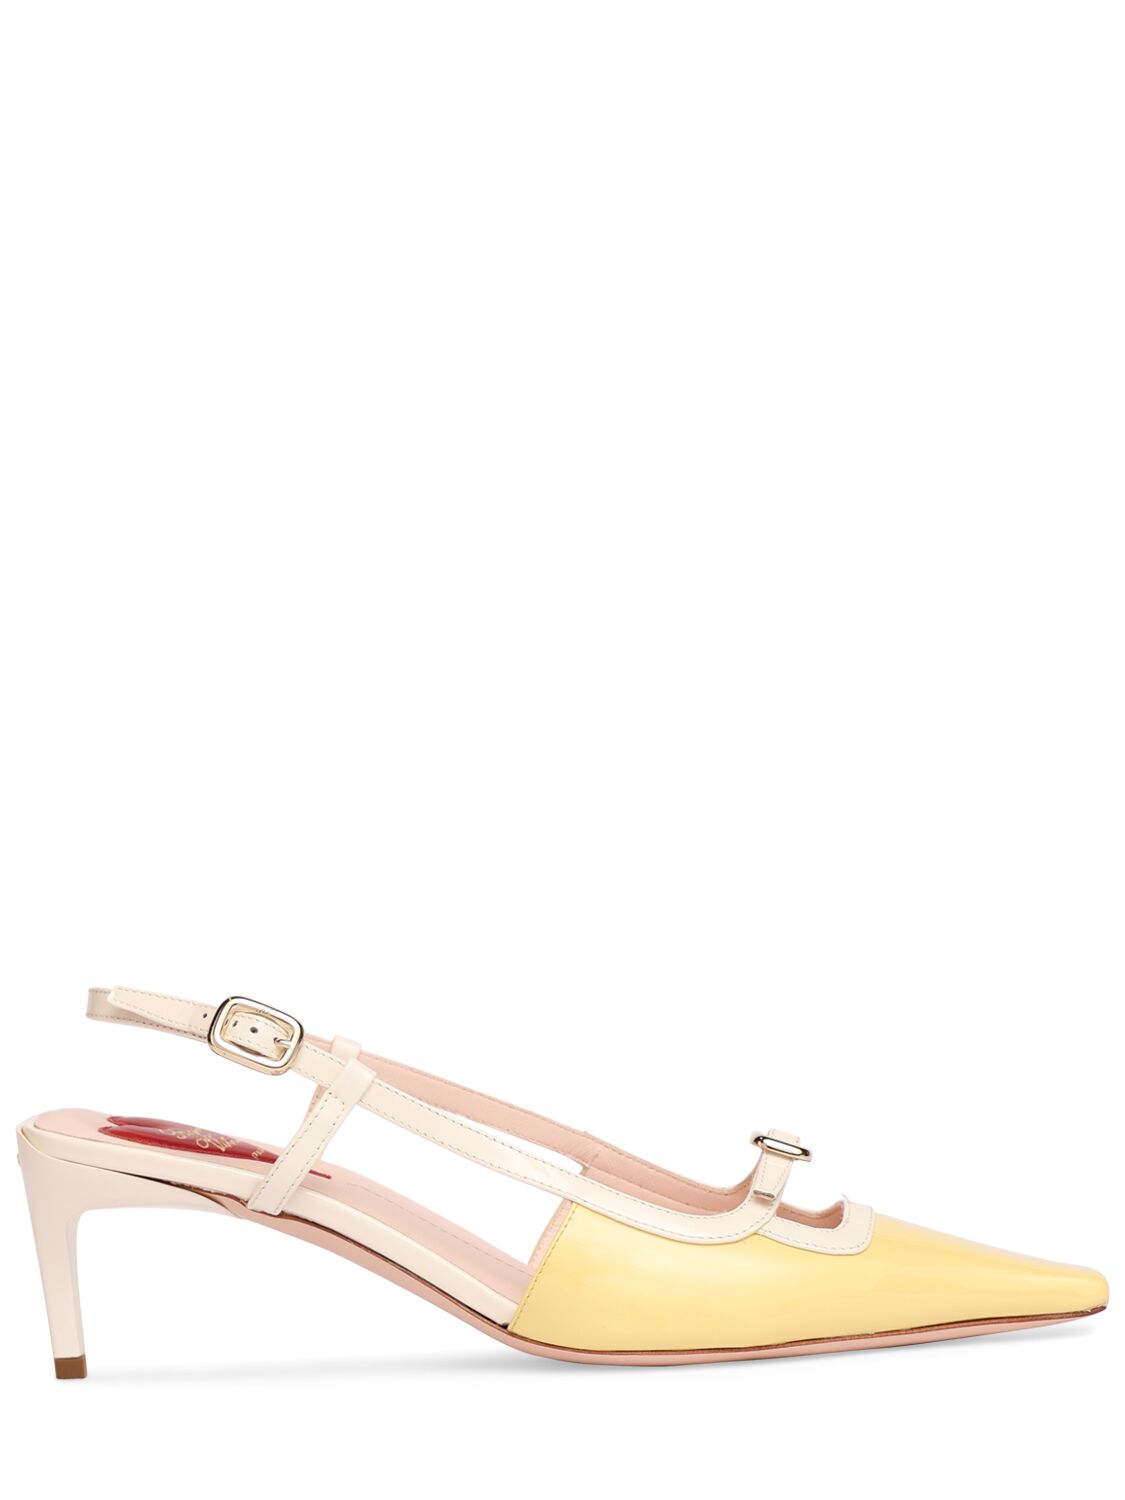 Roger Vivier 55mm Mini Buckle Patent Leather Pumps In Yellow,offwhite